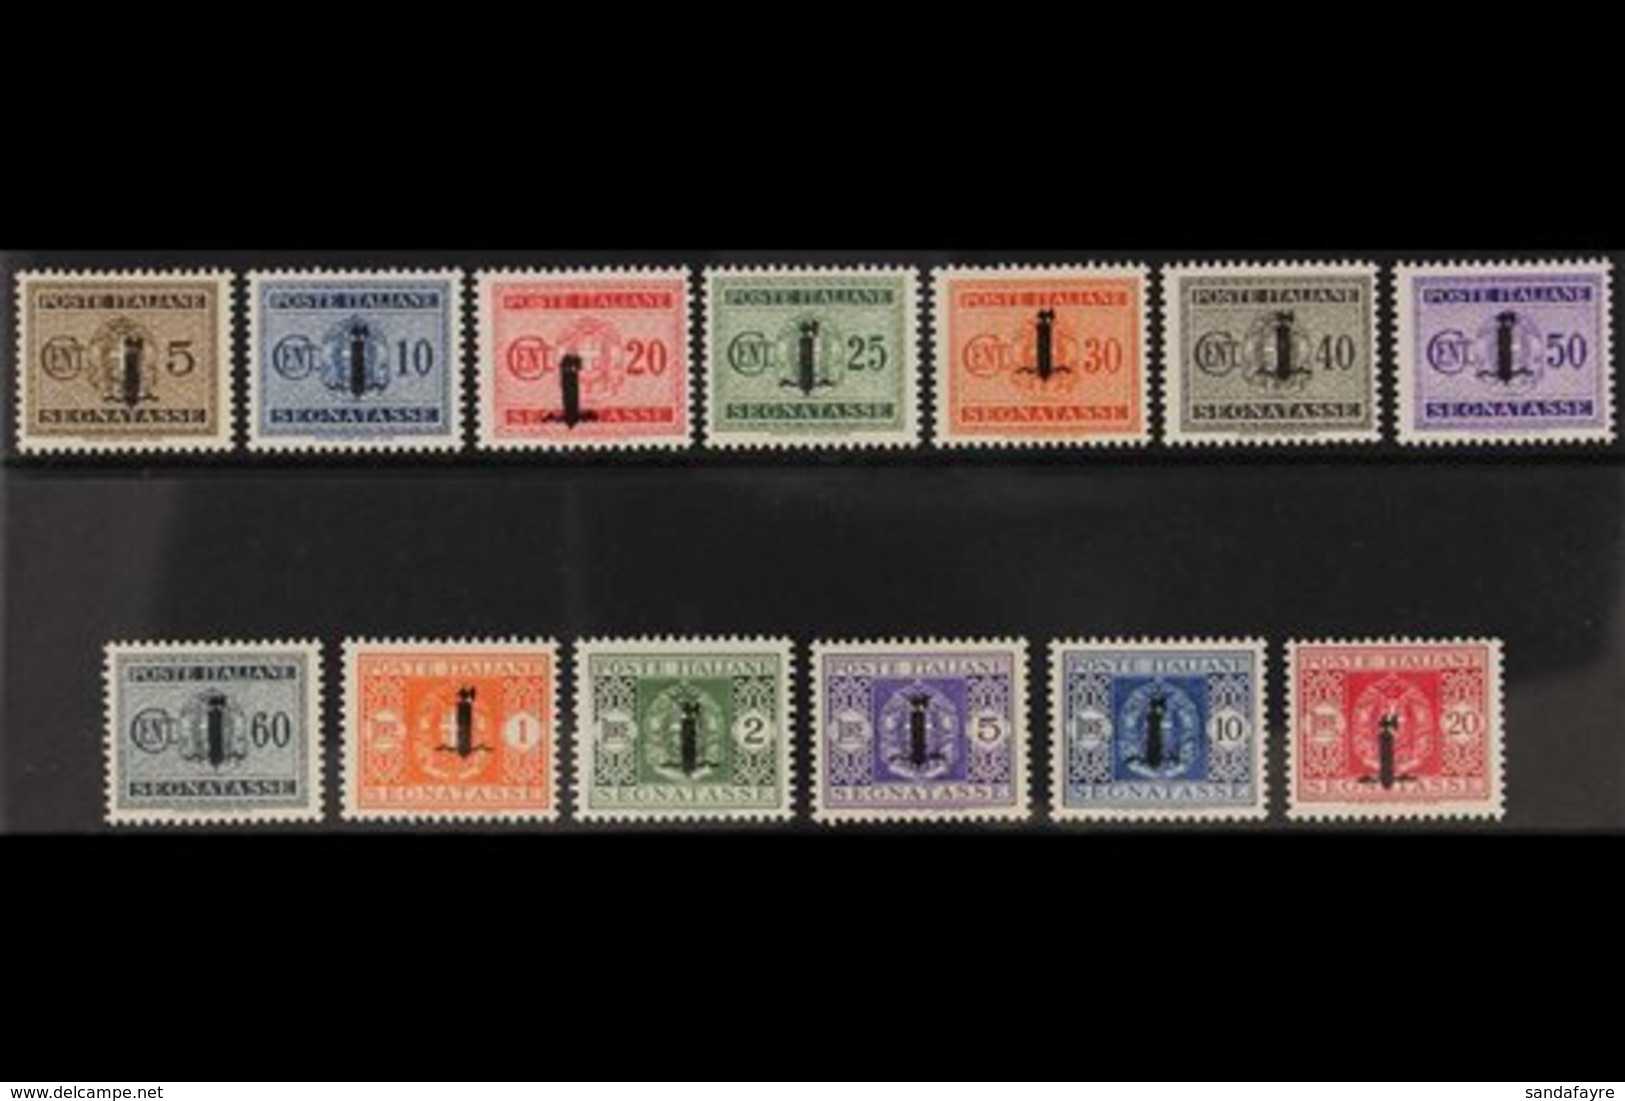 POSTAGE DUES ITALIAN SOCIAL REPUBLIC 1944 Overprints Complete Set (Sassone 60/72, SG D89/101), Never Hinged Mint, Fresh. - Unclassified